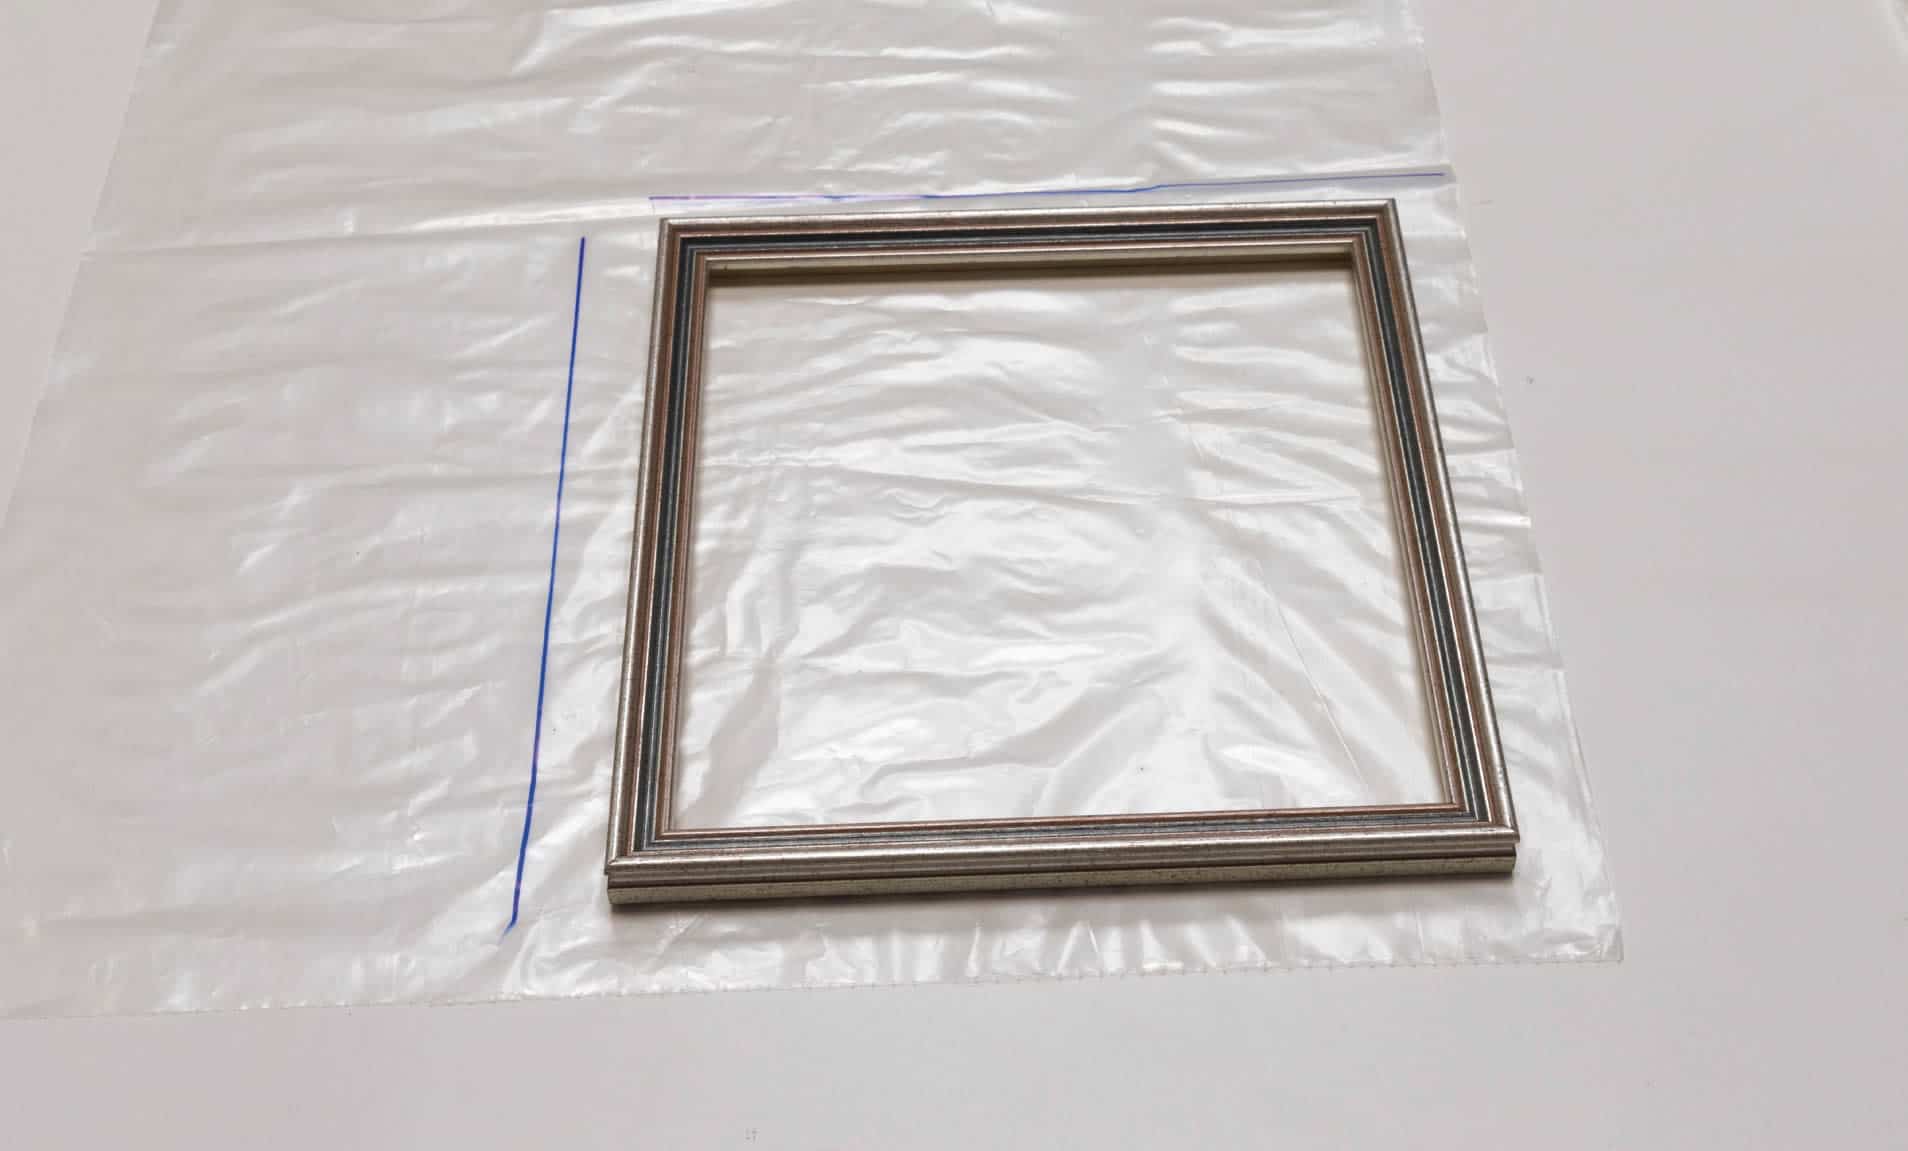 step 1a - create mini indoor greenhouse - photo of picture frame on plastic